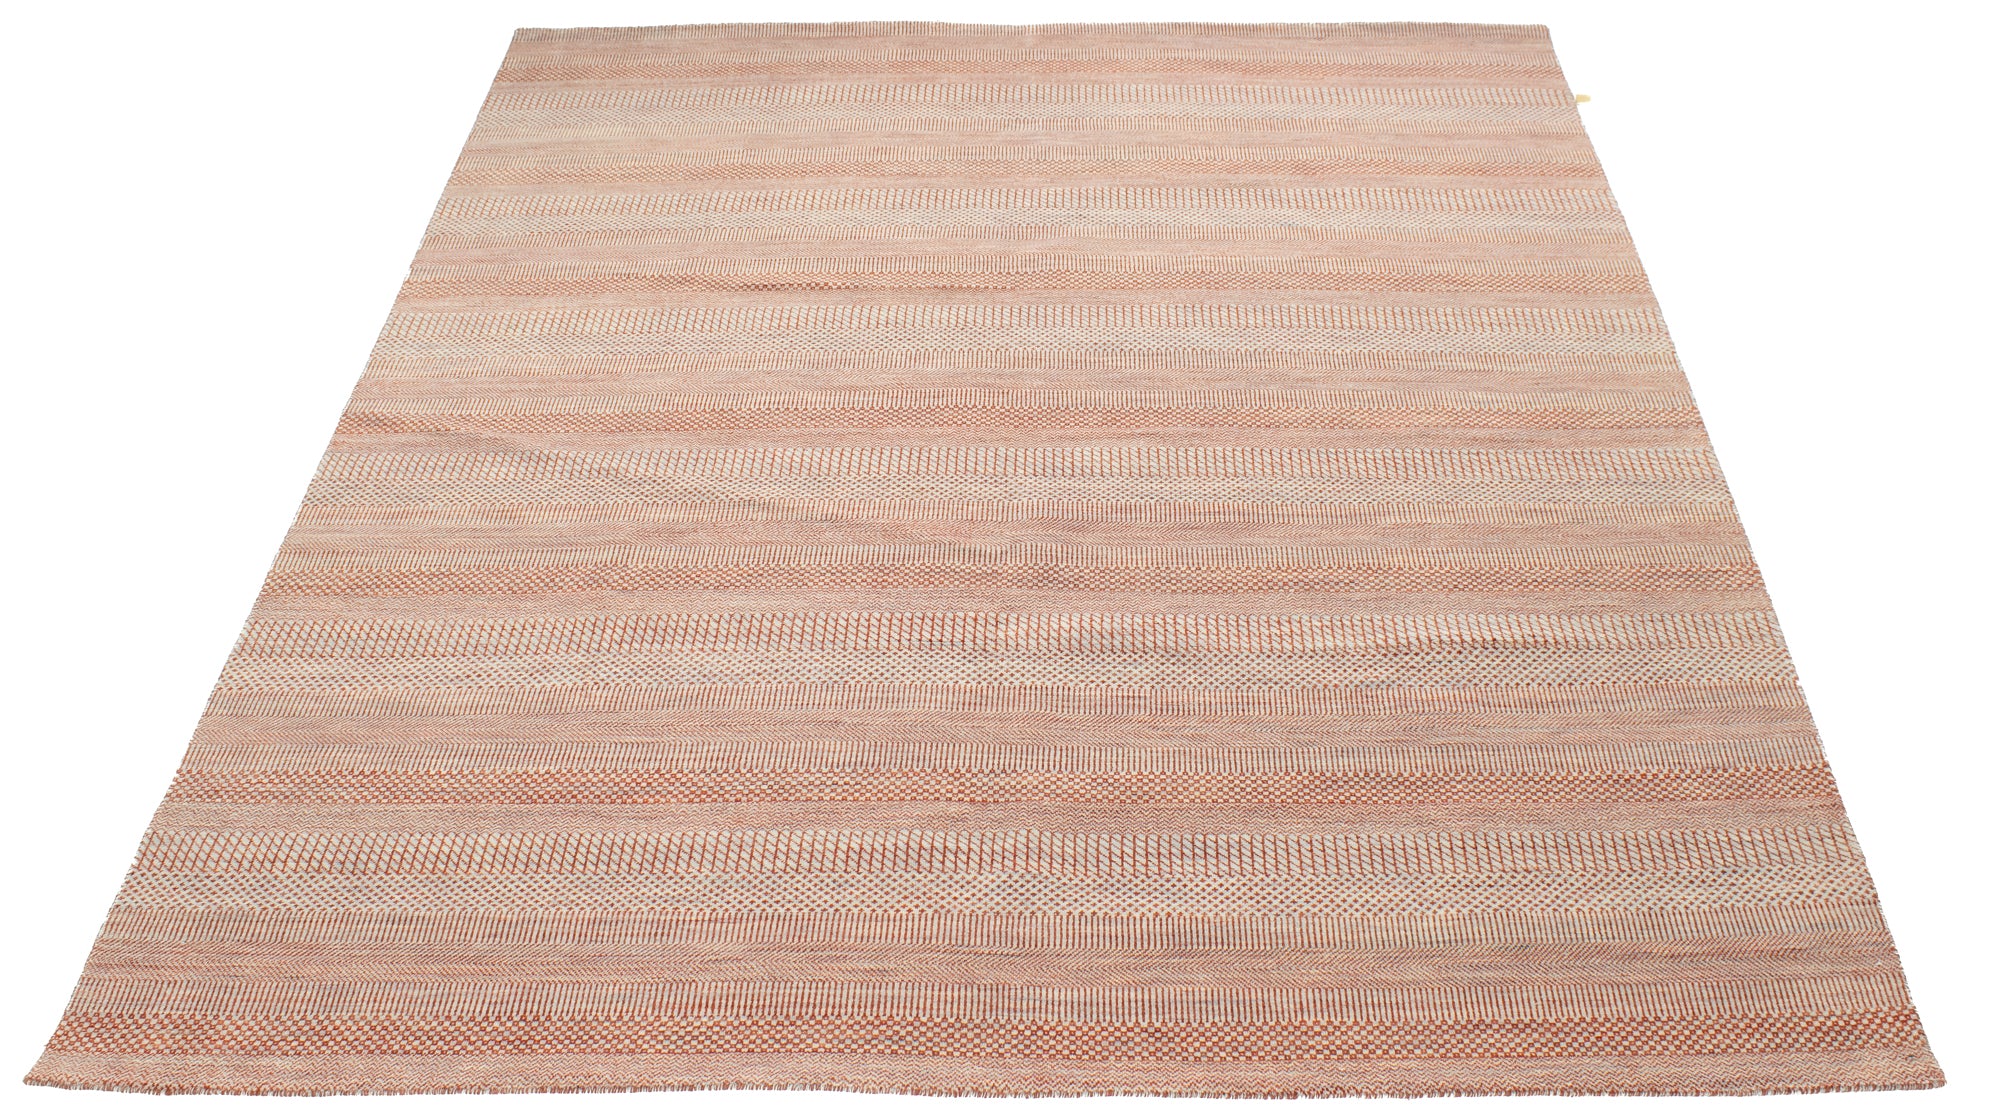 Indian Contemporary Rug <br> 8'1 x 10'4